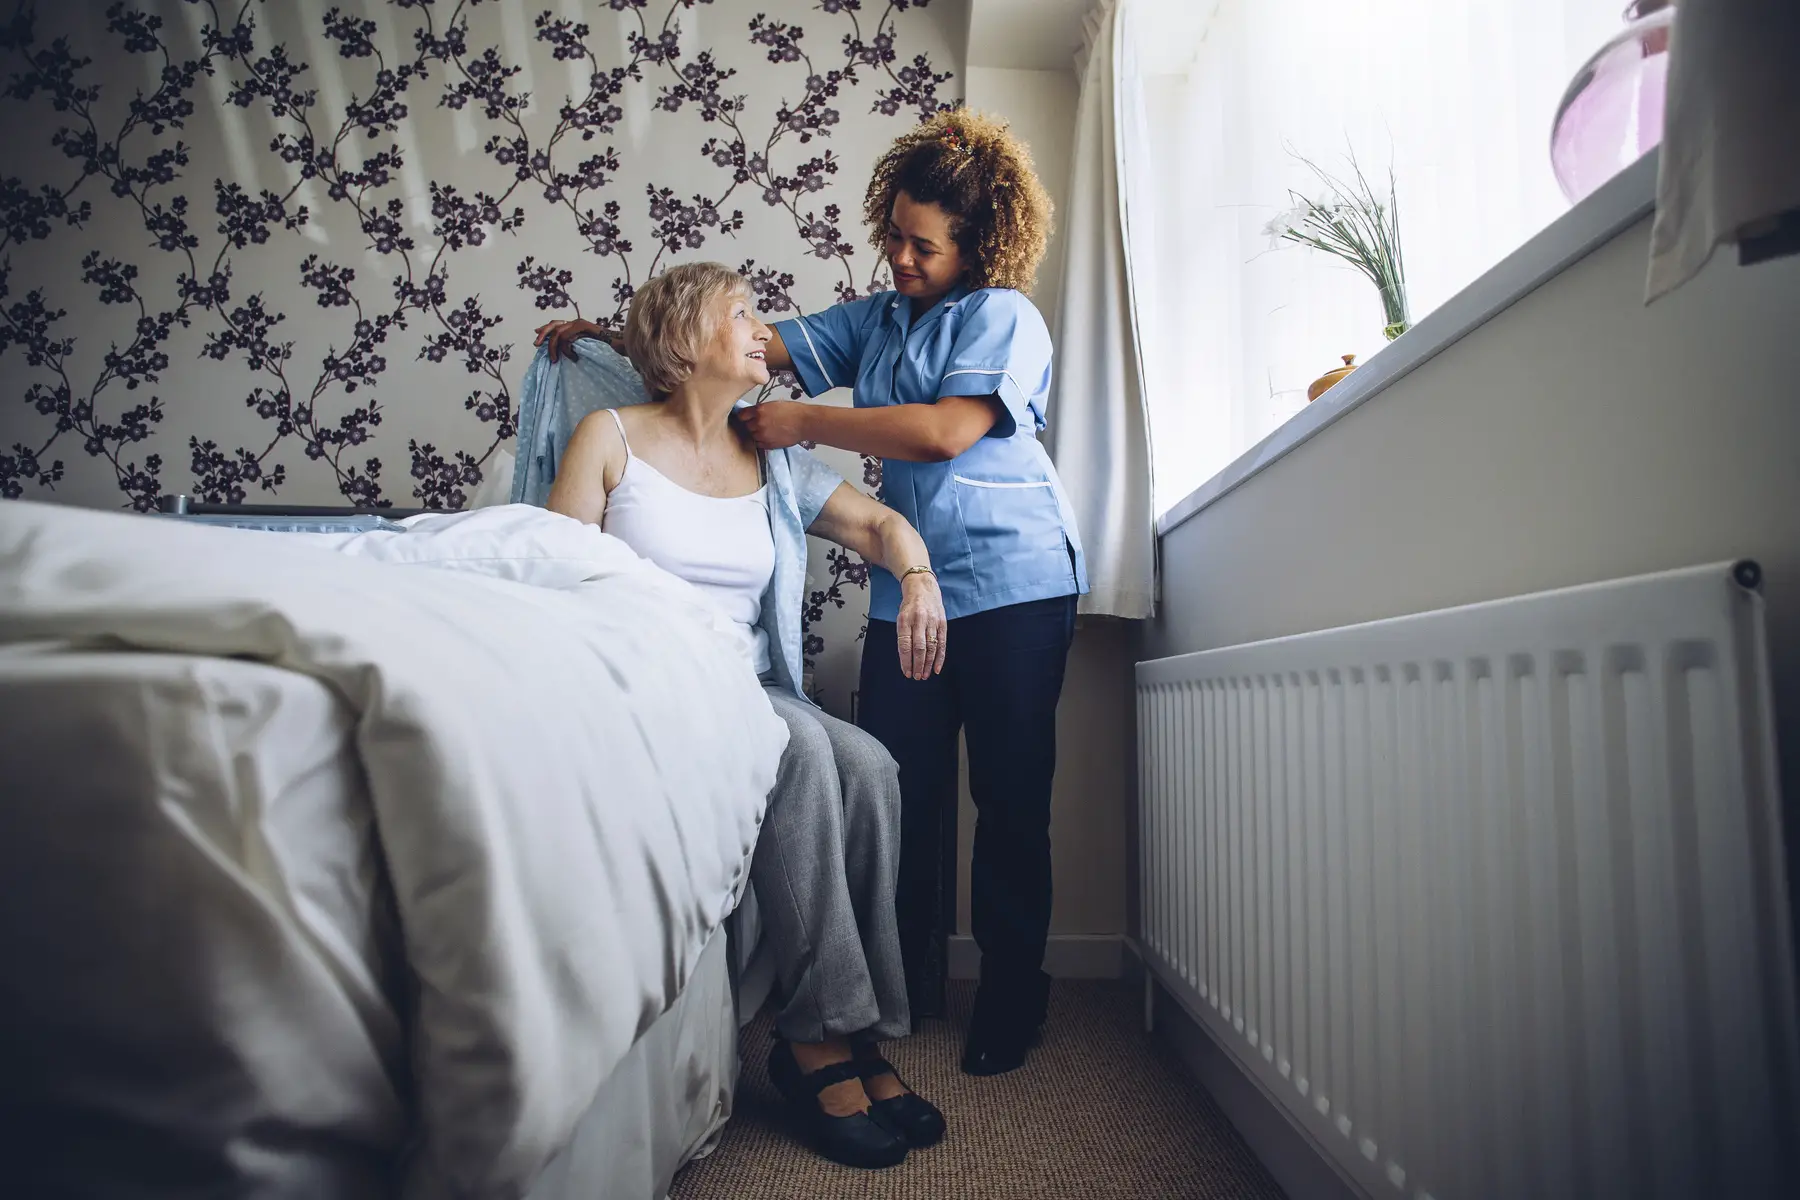 Care at home provider helping a senior woman get dressed in her bedroom